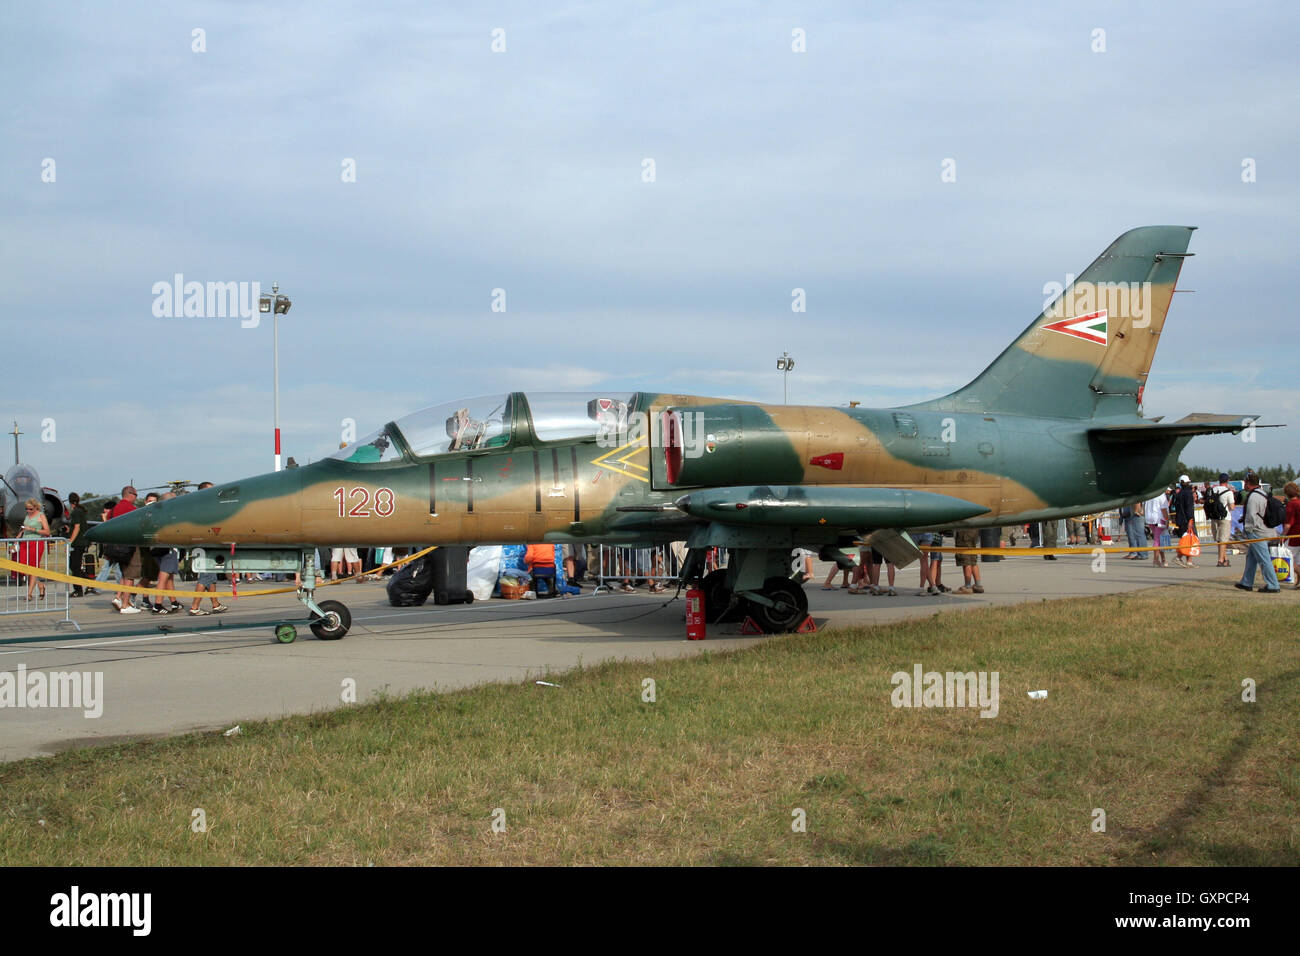 Hungarian L-39 trainer jet on siplay at Kecskemet airshow Stock Photo